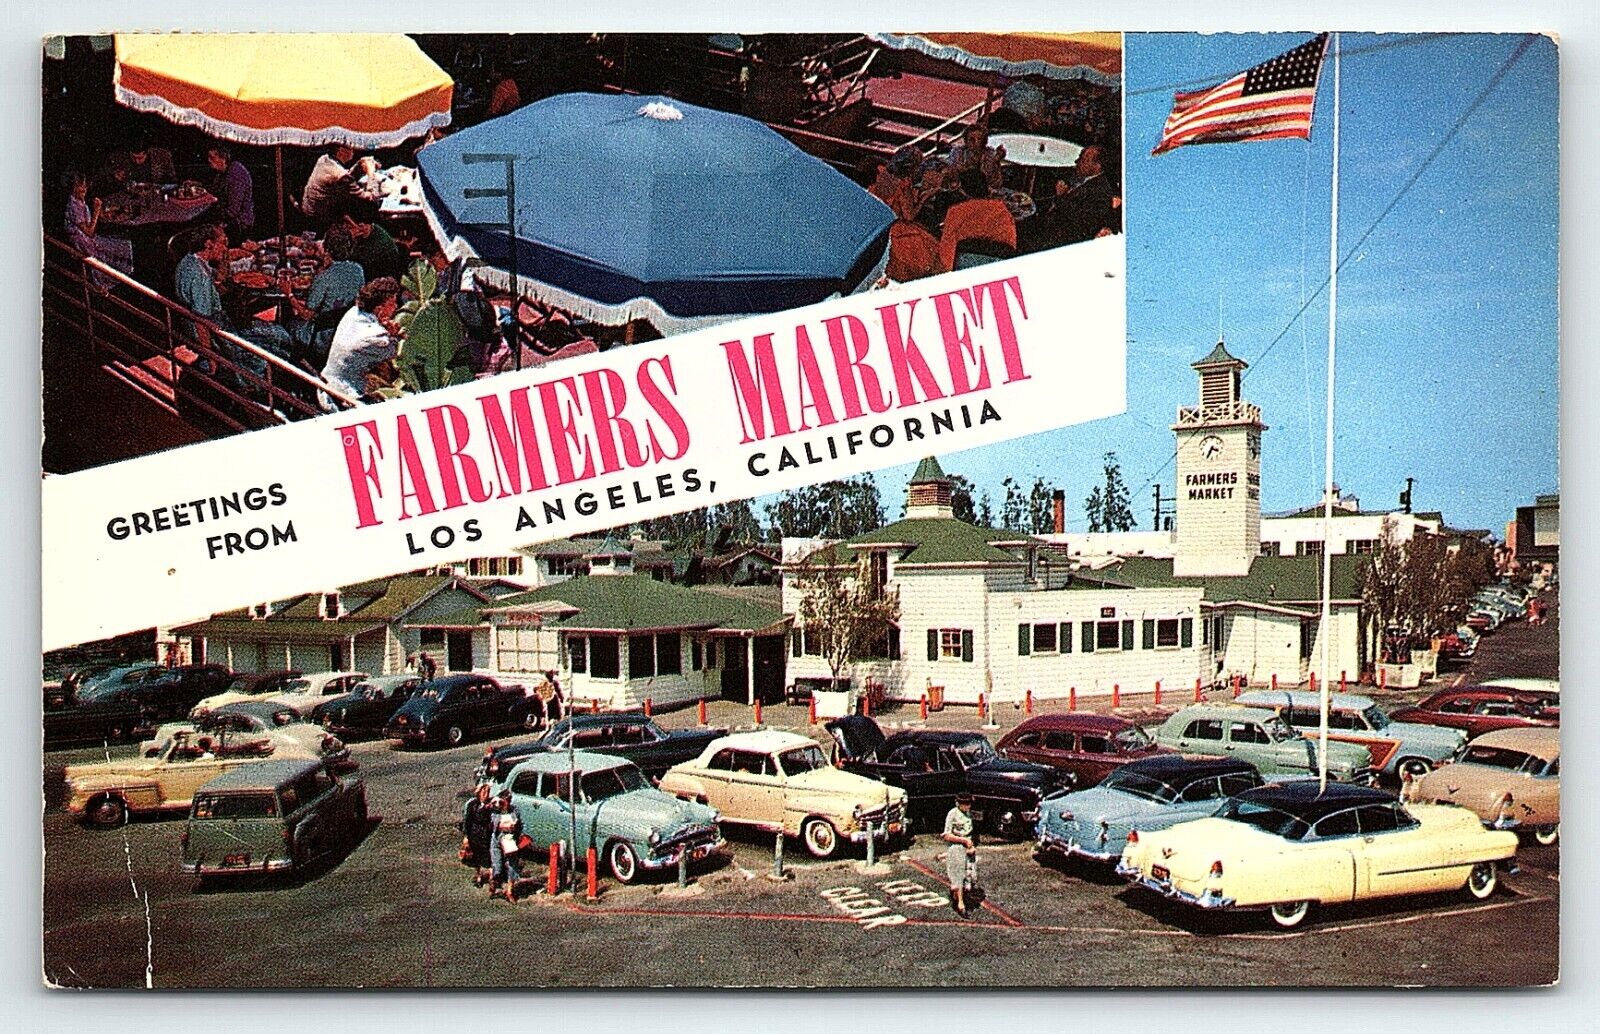 1956 LOS ANGELES CA GREETINGS FROM FARMERS MARKET OLD CARS POSTCARD P3808